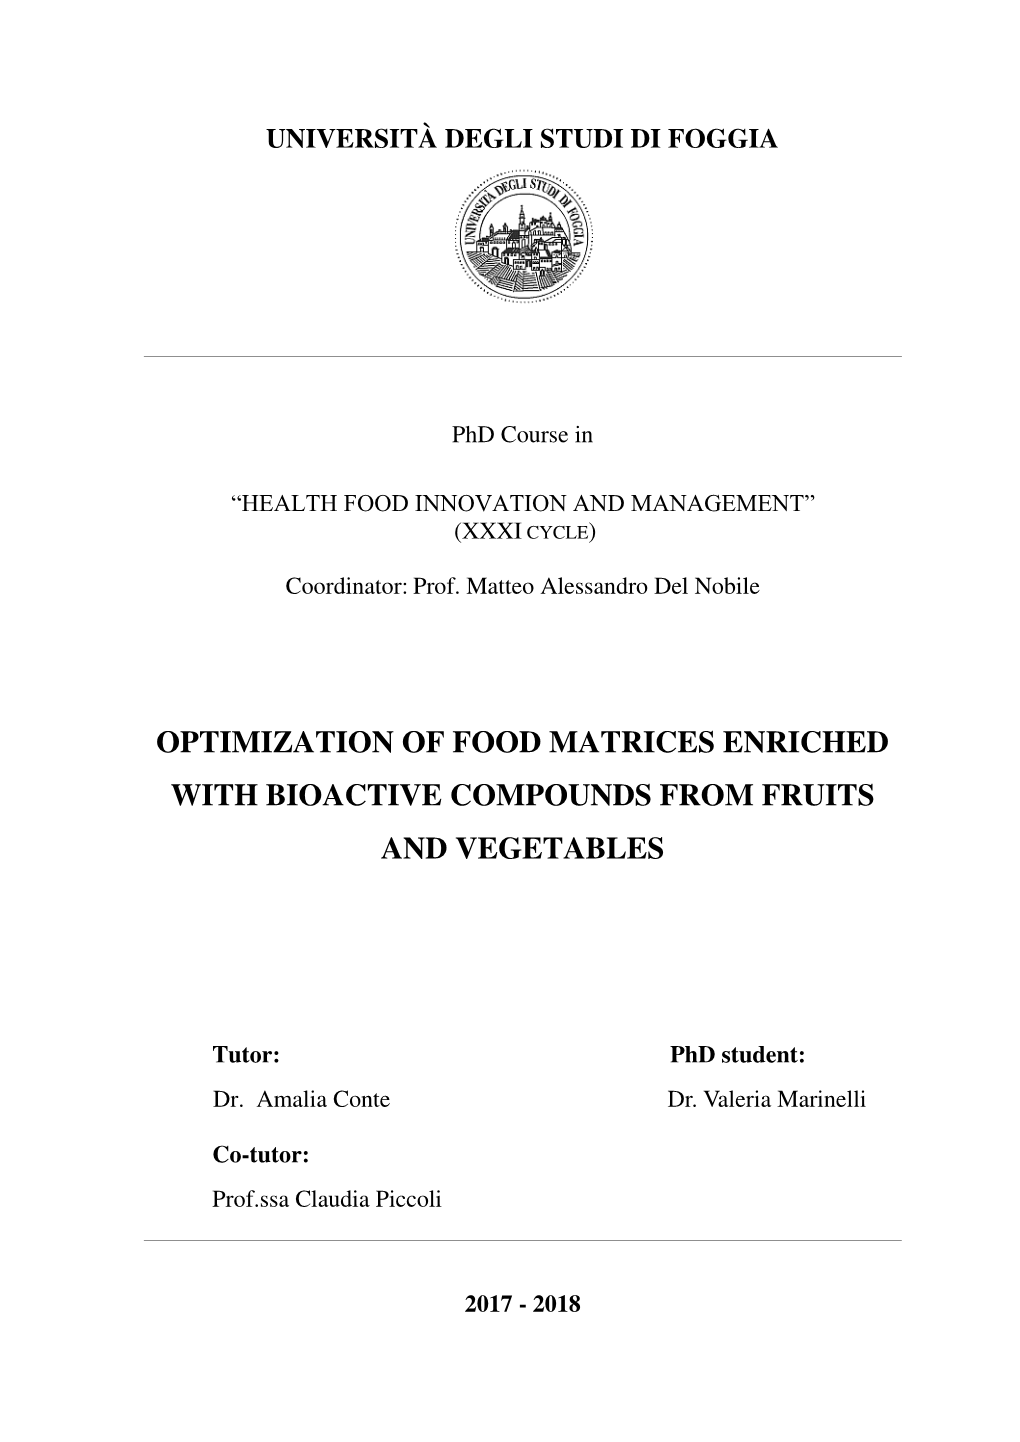 Optimization of Food Matrices Enriched with Bioactive Compounds from Fruits and Vegetables